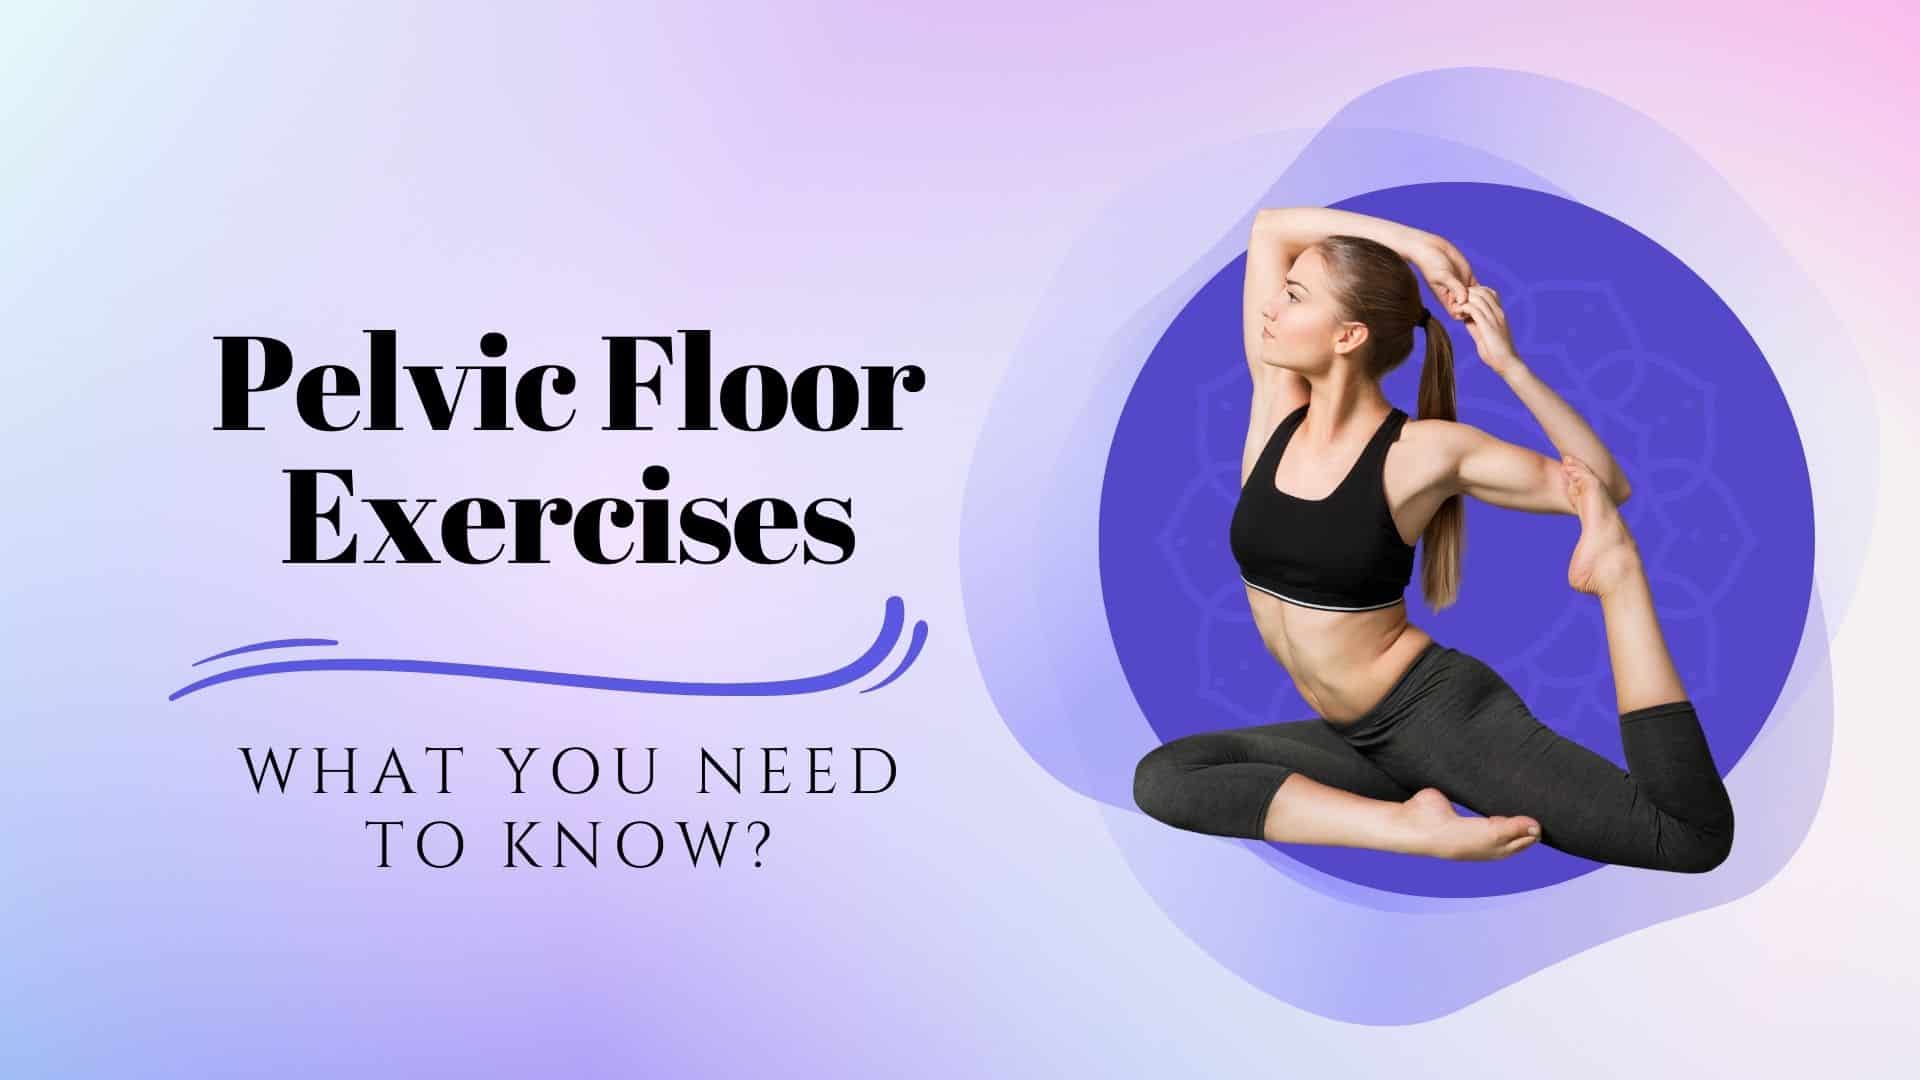 Pelvic Floor Exercises - What You Need To Know?